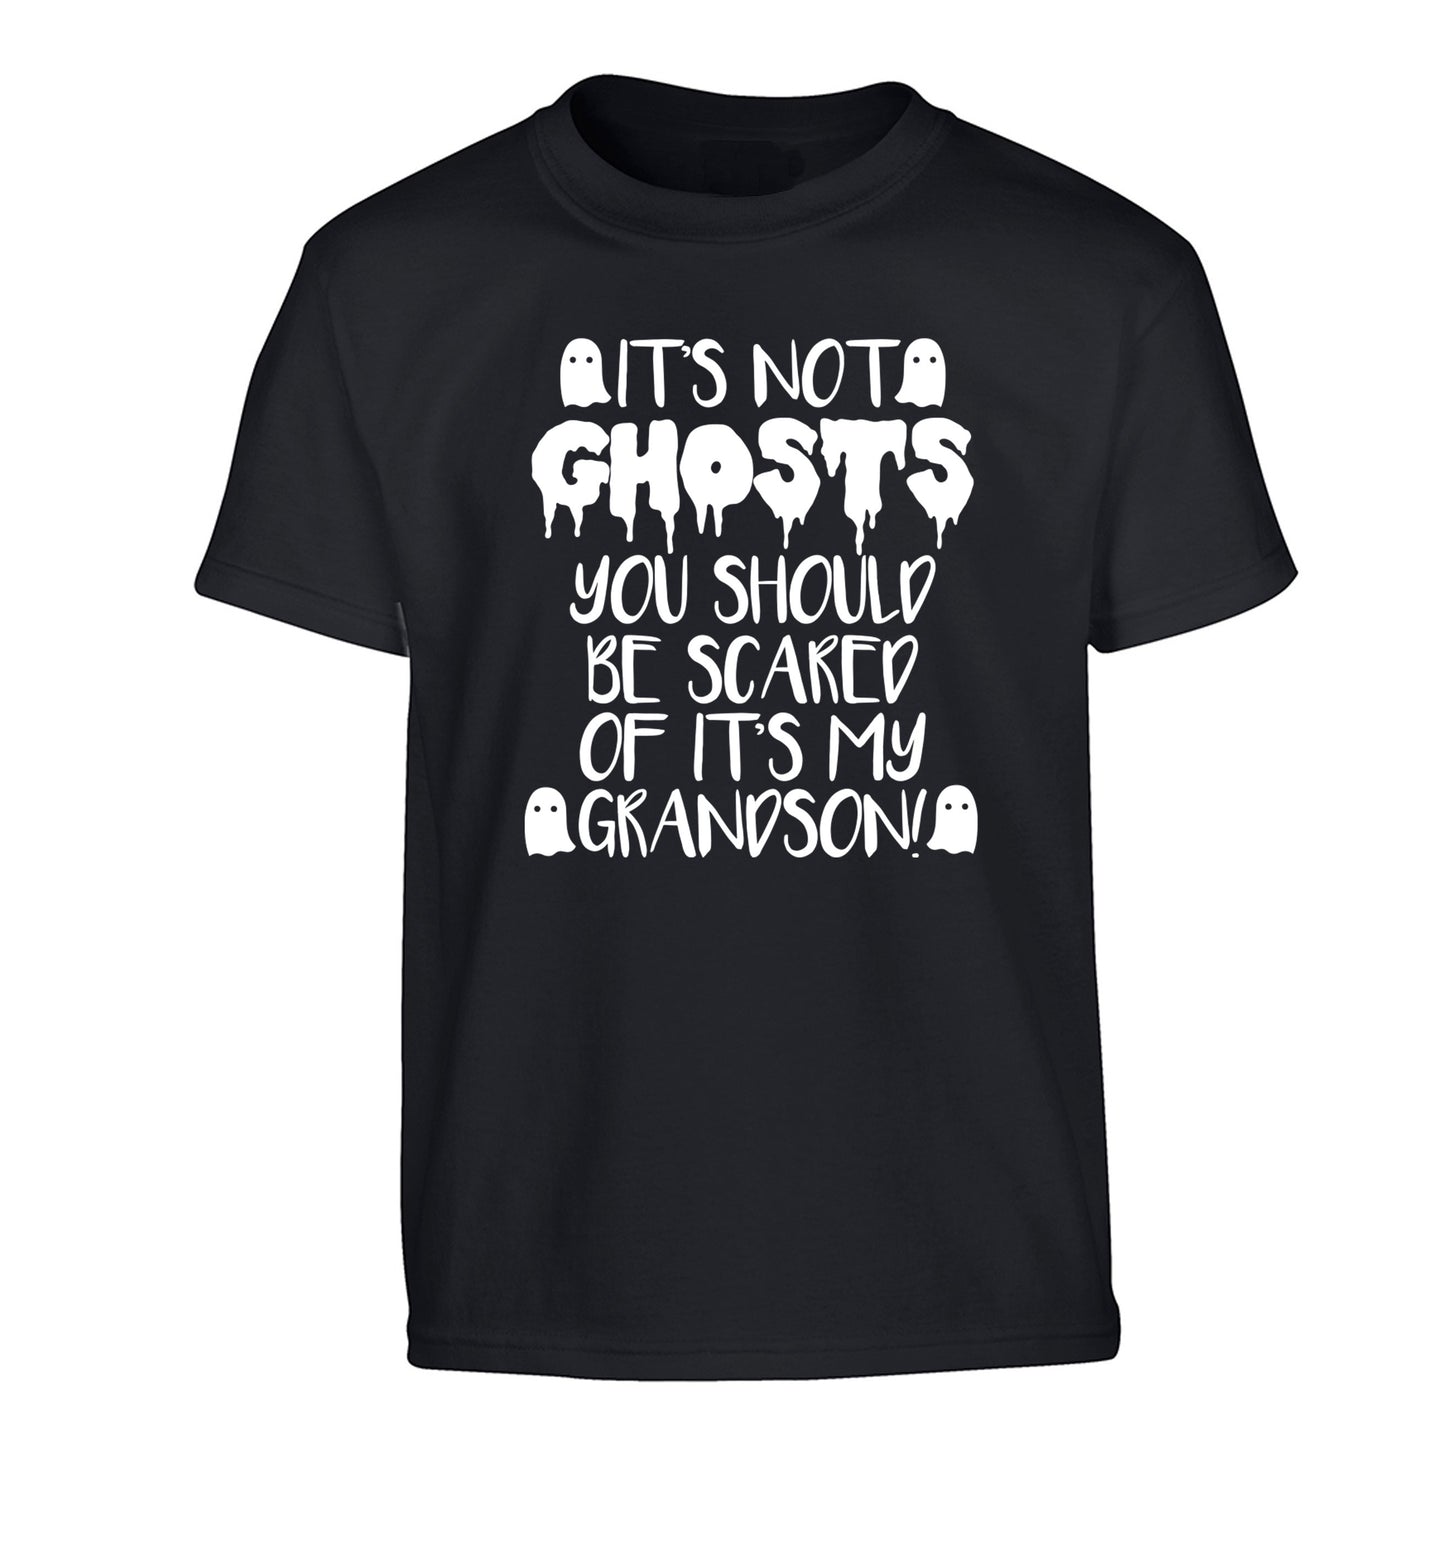 It's not ghosts you should be scared of it's my grandson! Children's black Tshirt 12-14 Years